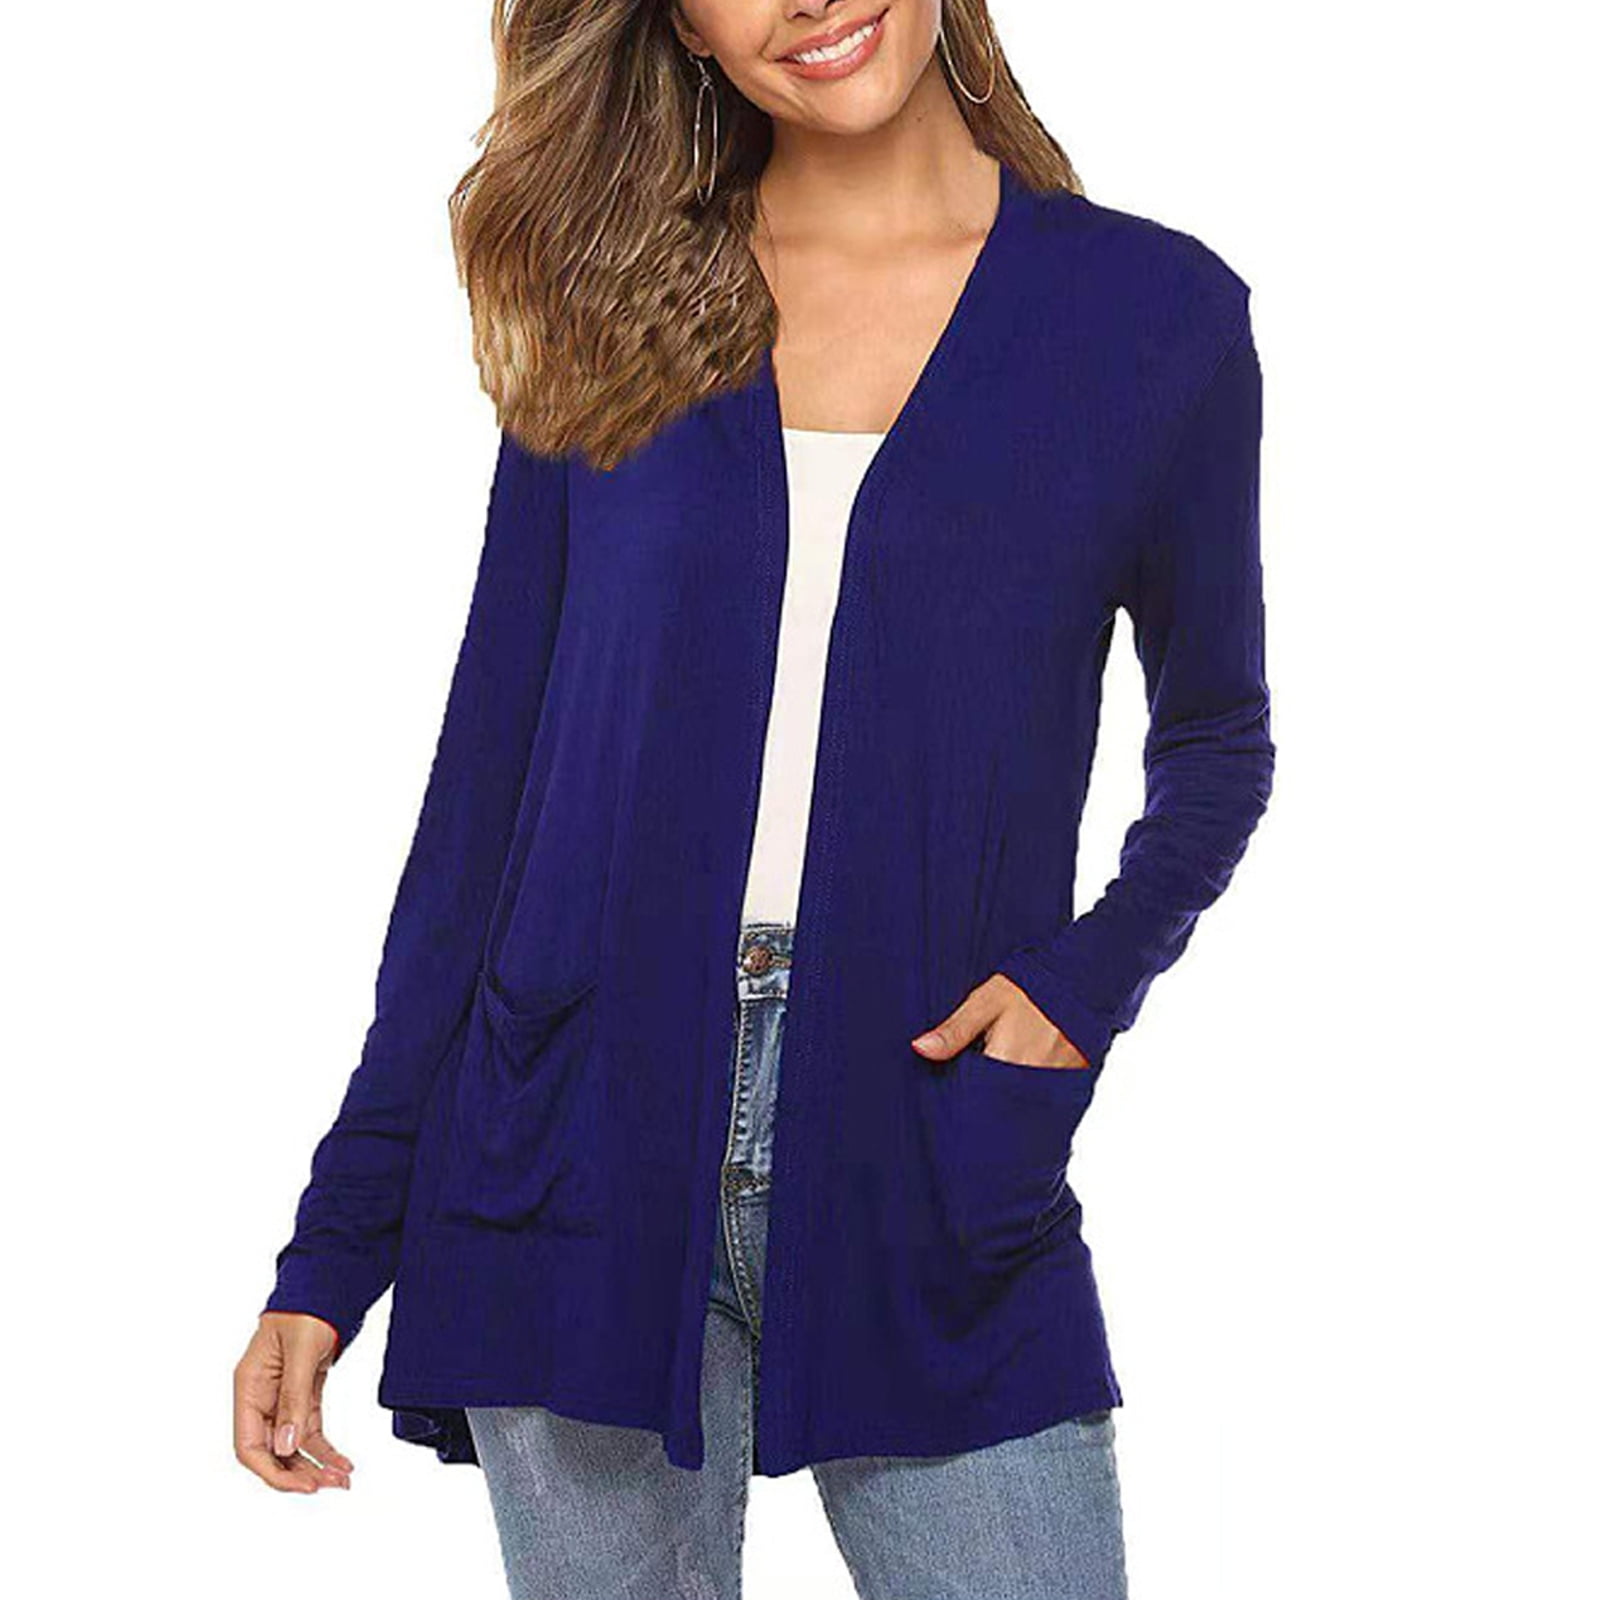 Oversized Cashmere Sweater for Woman Open Front Short Cardigan with pockets